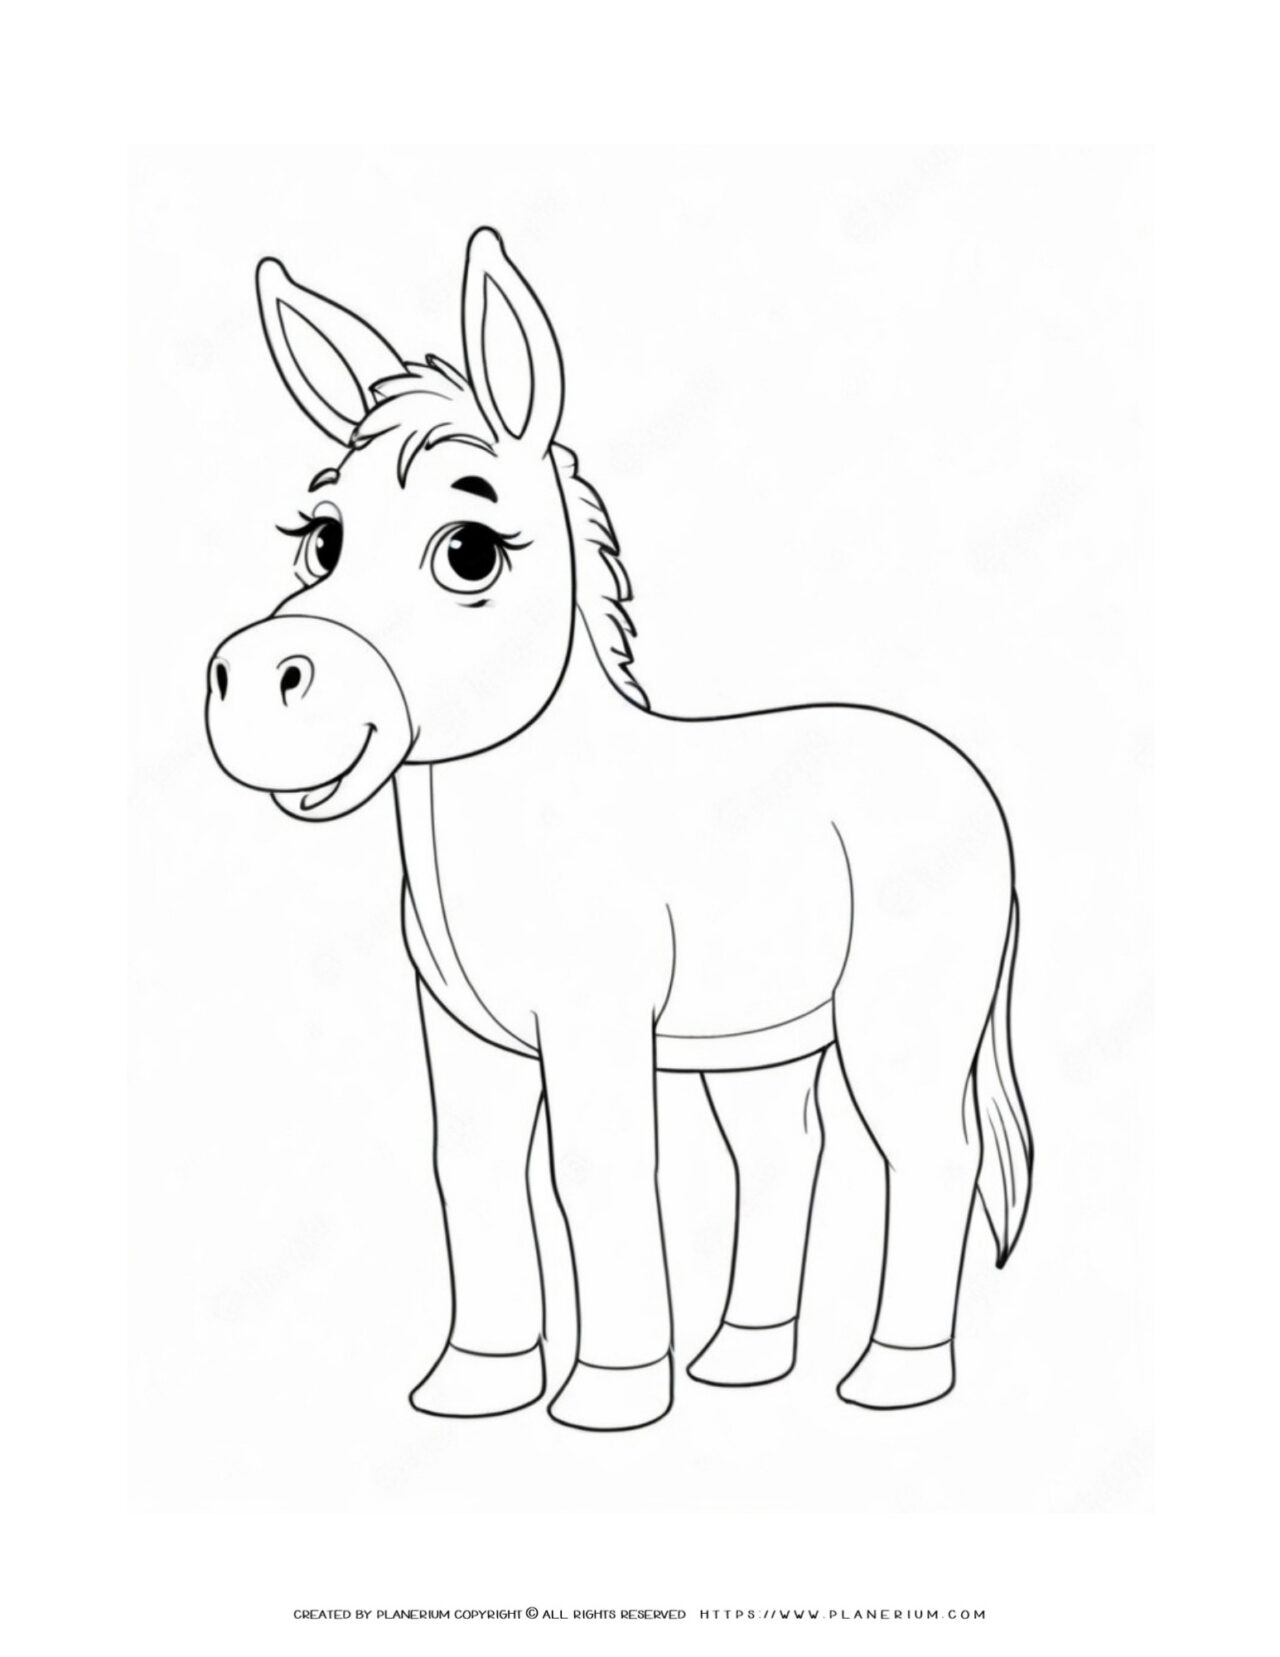 Cute-Donkey-Outline-Simple-Coloring-Page